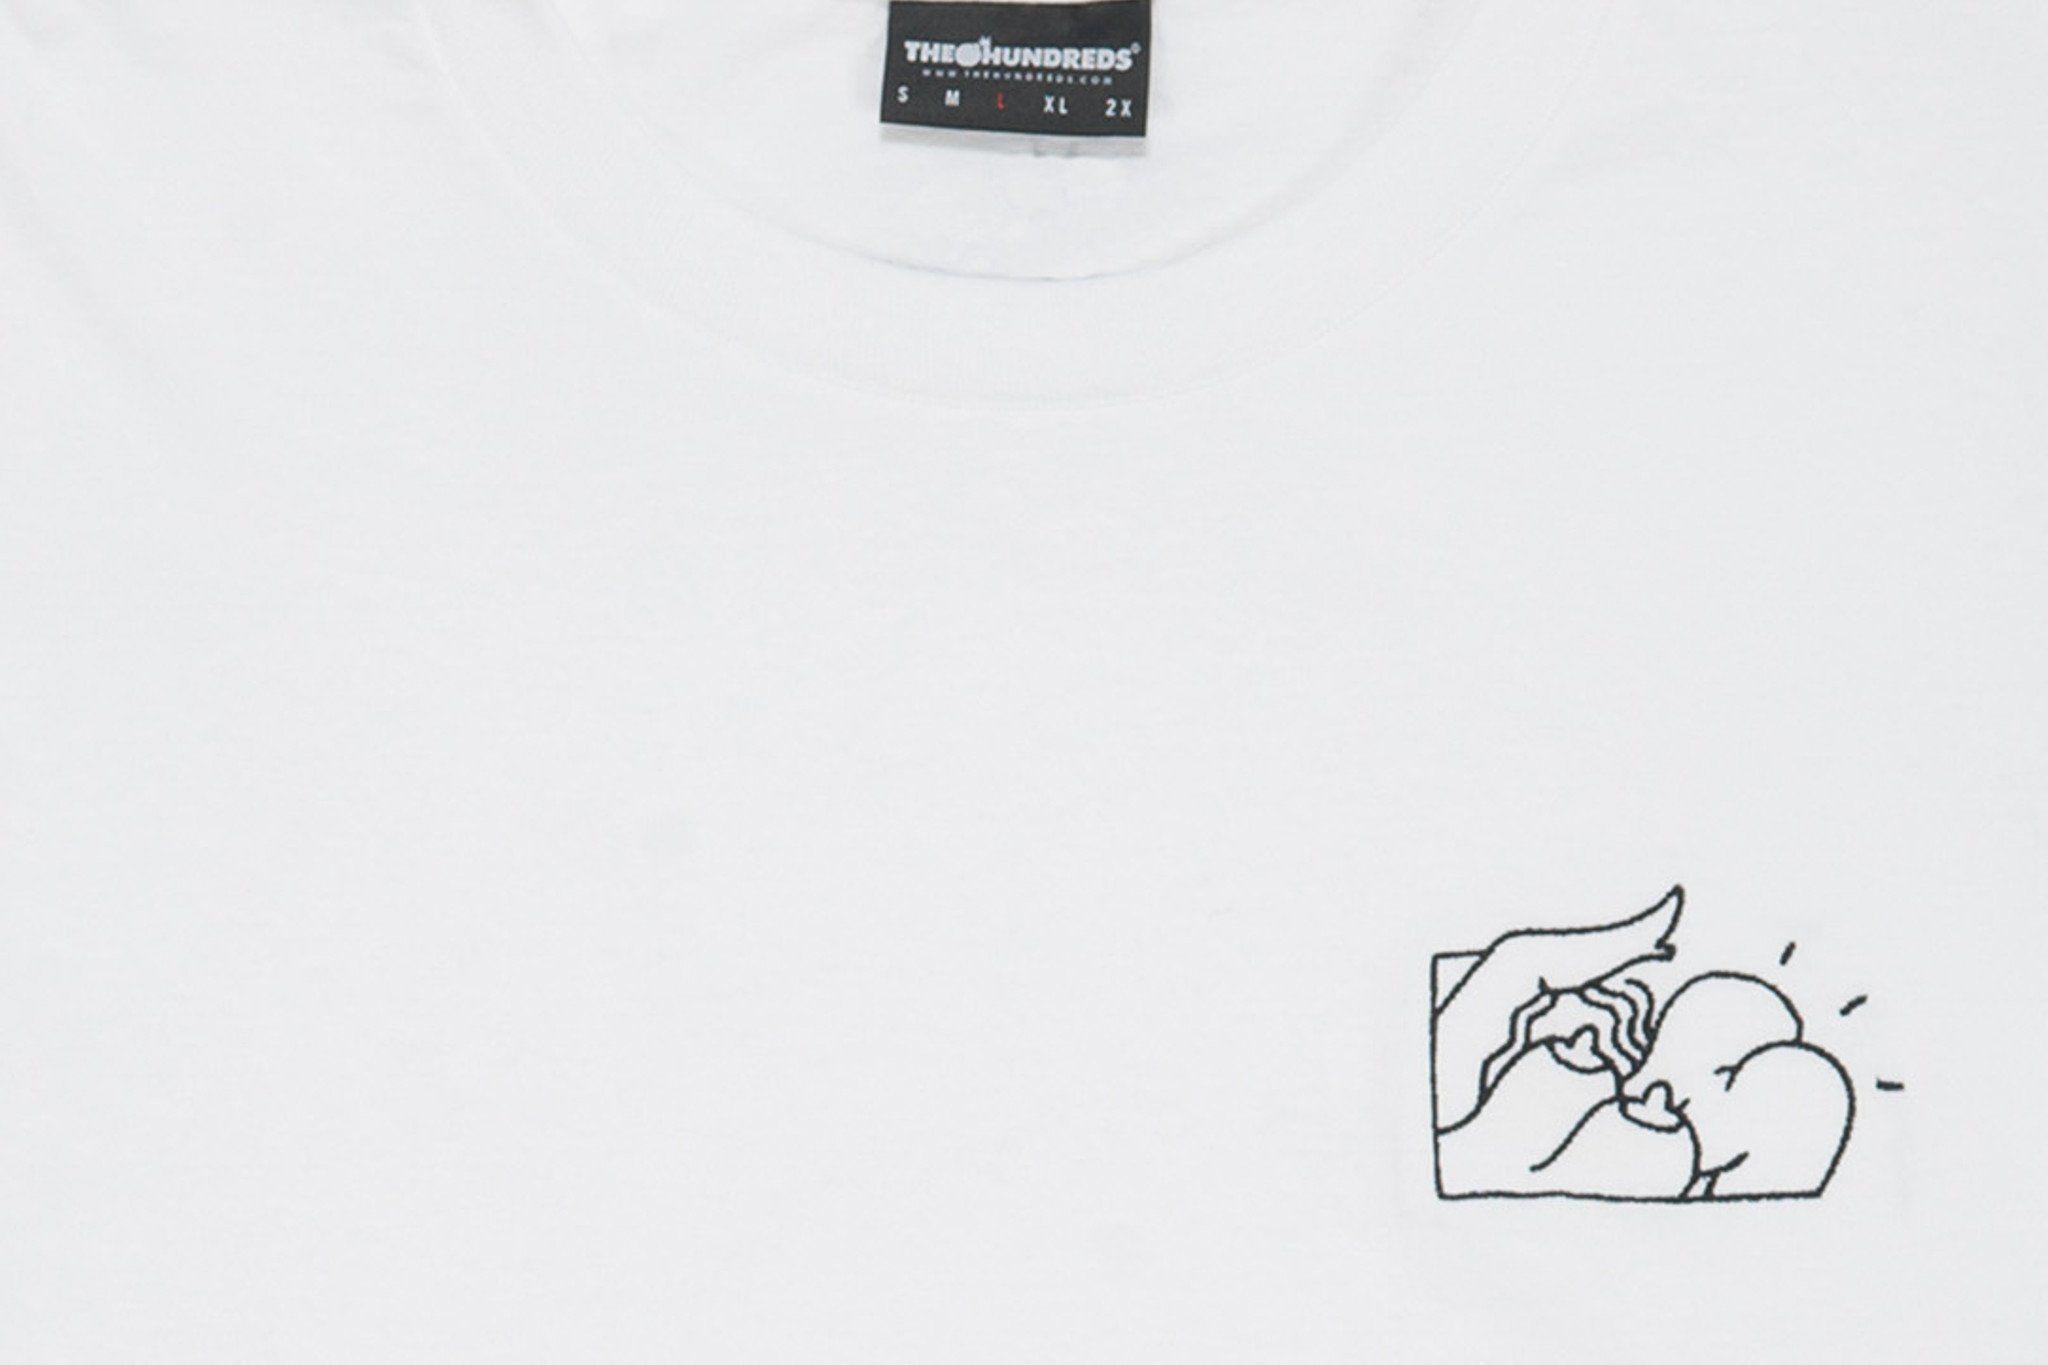 Hundreds Drawing Logo - 7 Hypebeast drawing logo for free download on Ayoqq.org